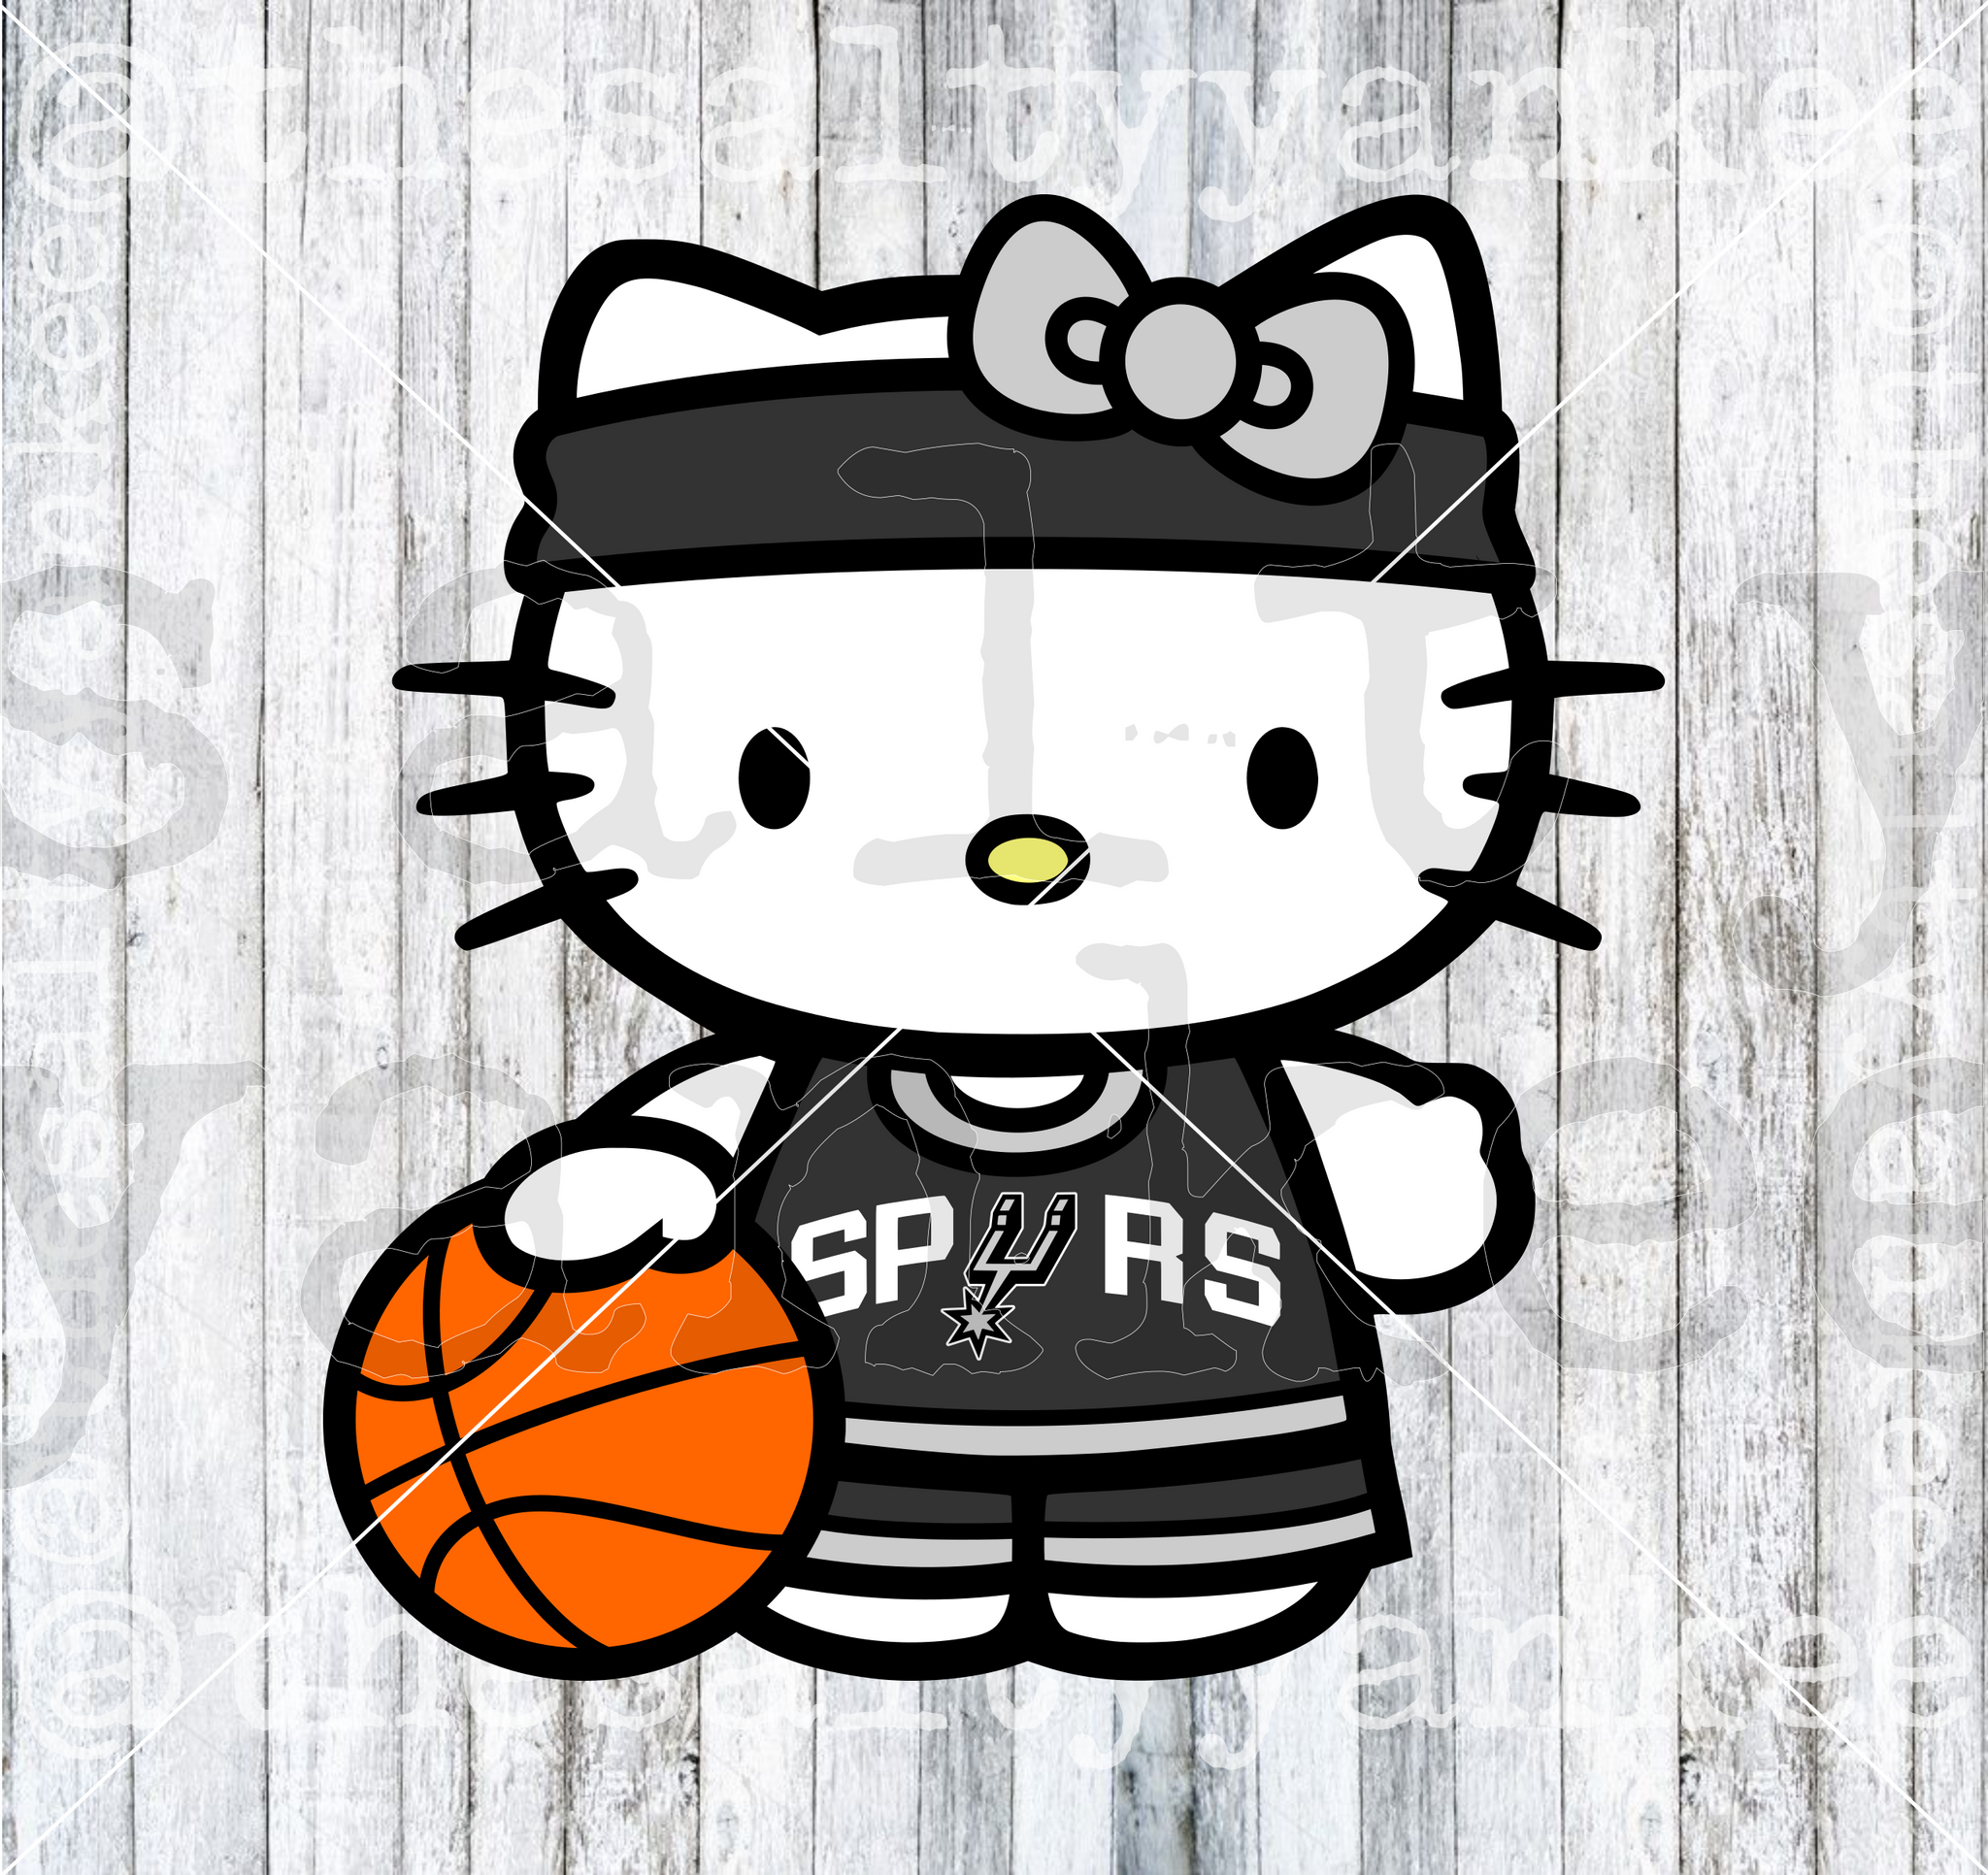 Cute Kitty in Team Basketball Attire SVG and PNG File Download